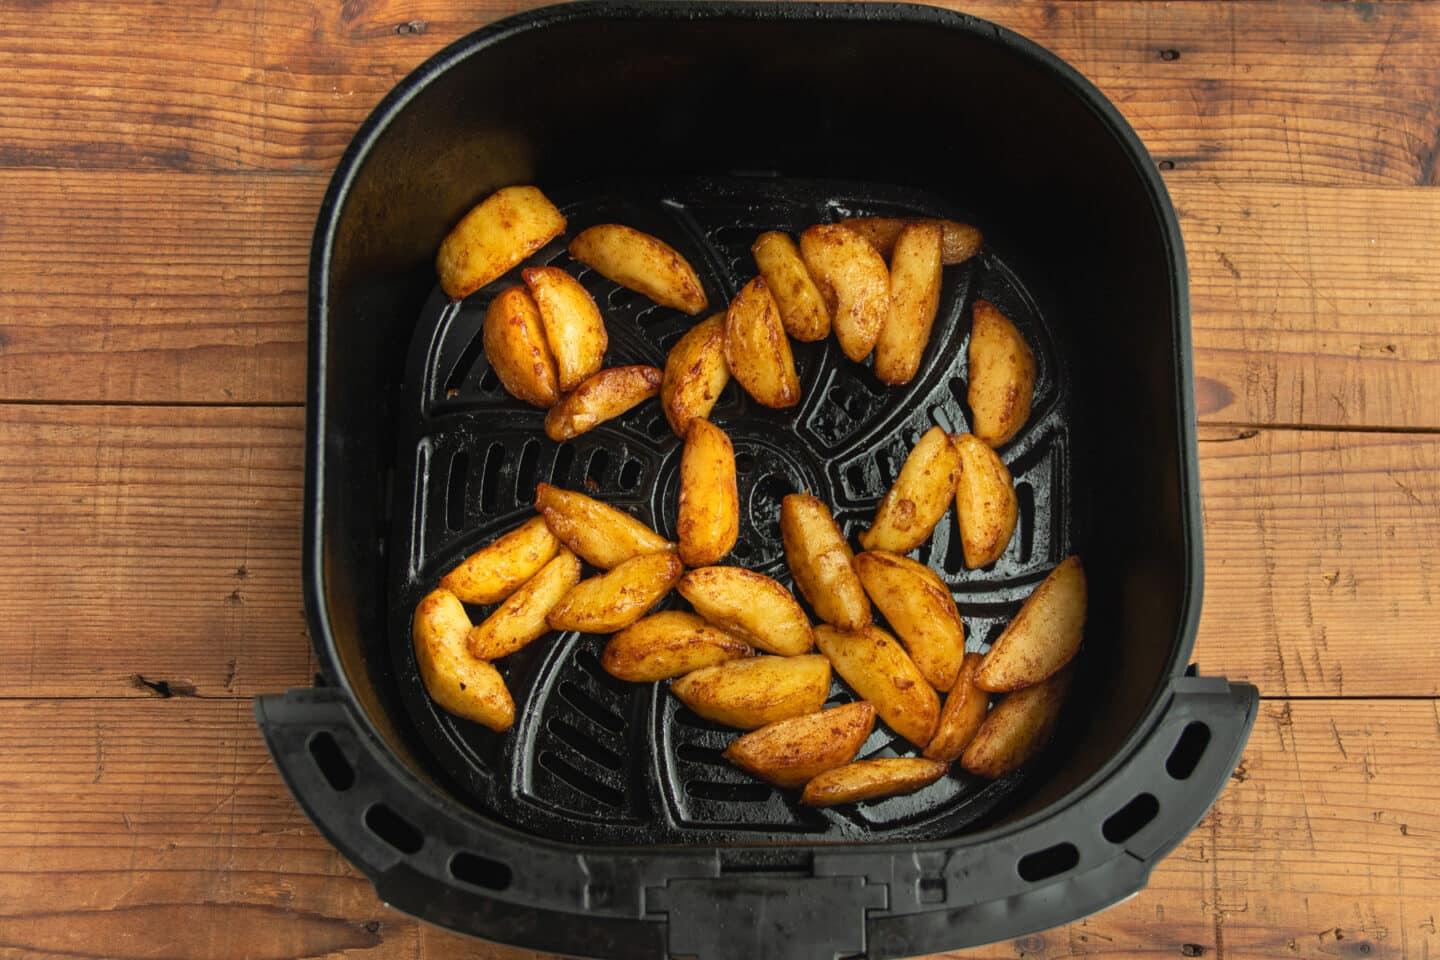 This is a picture of the air fryer basket with the cooked apples.